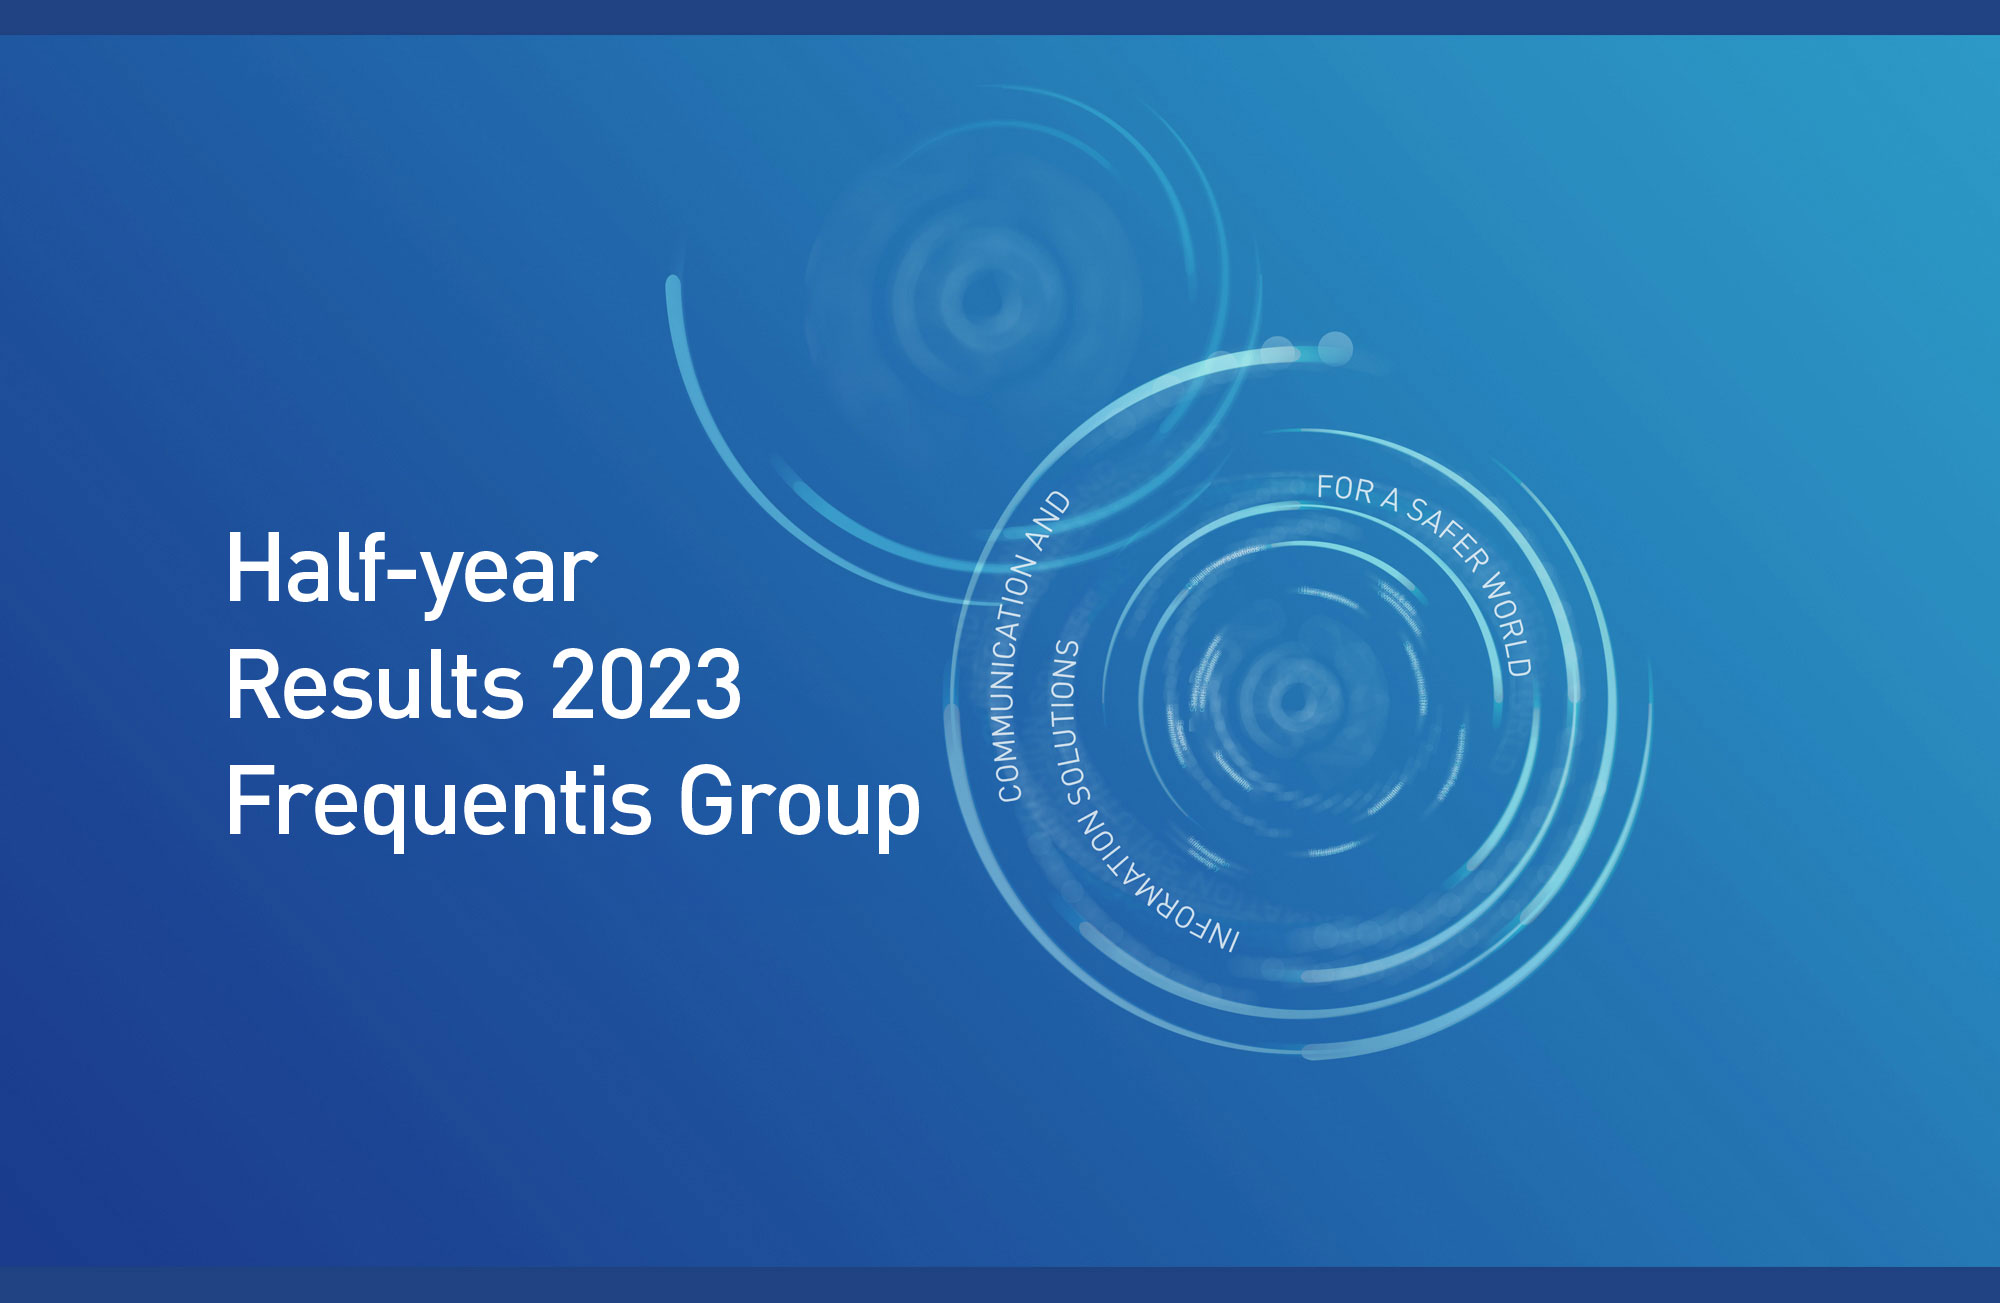 generic picture reading "Half-year Results 2023 - Frequentis Group"